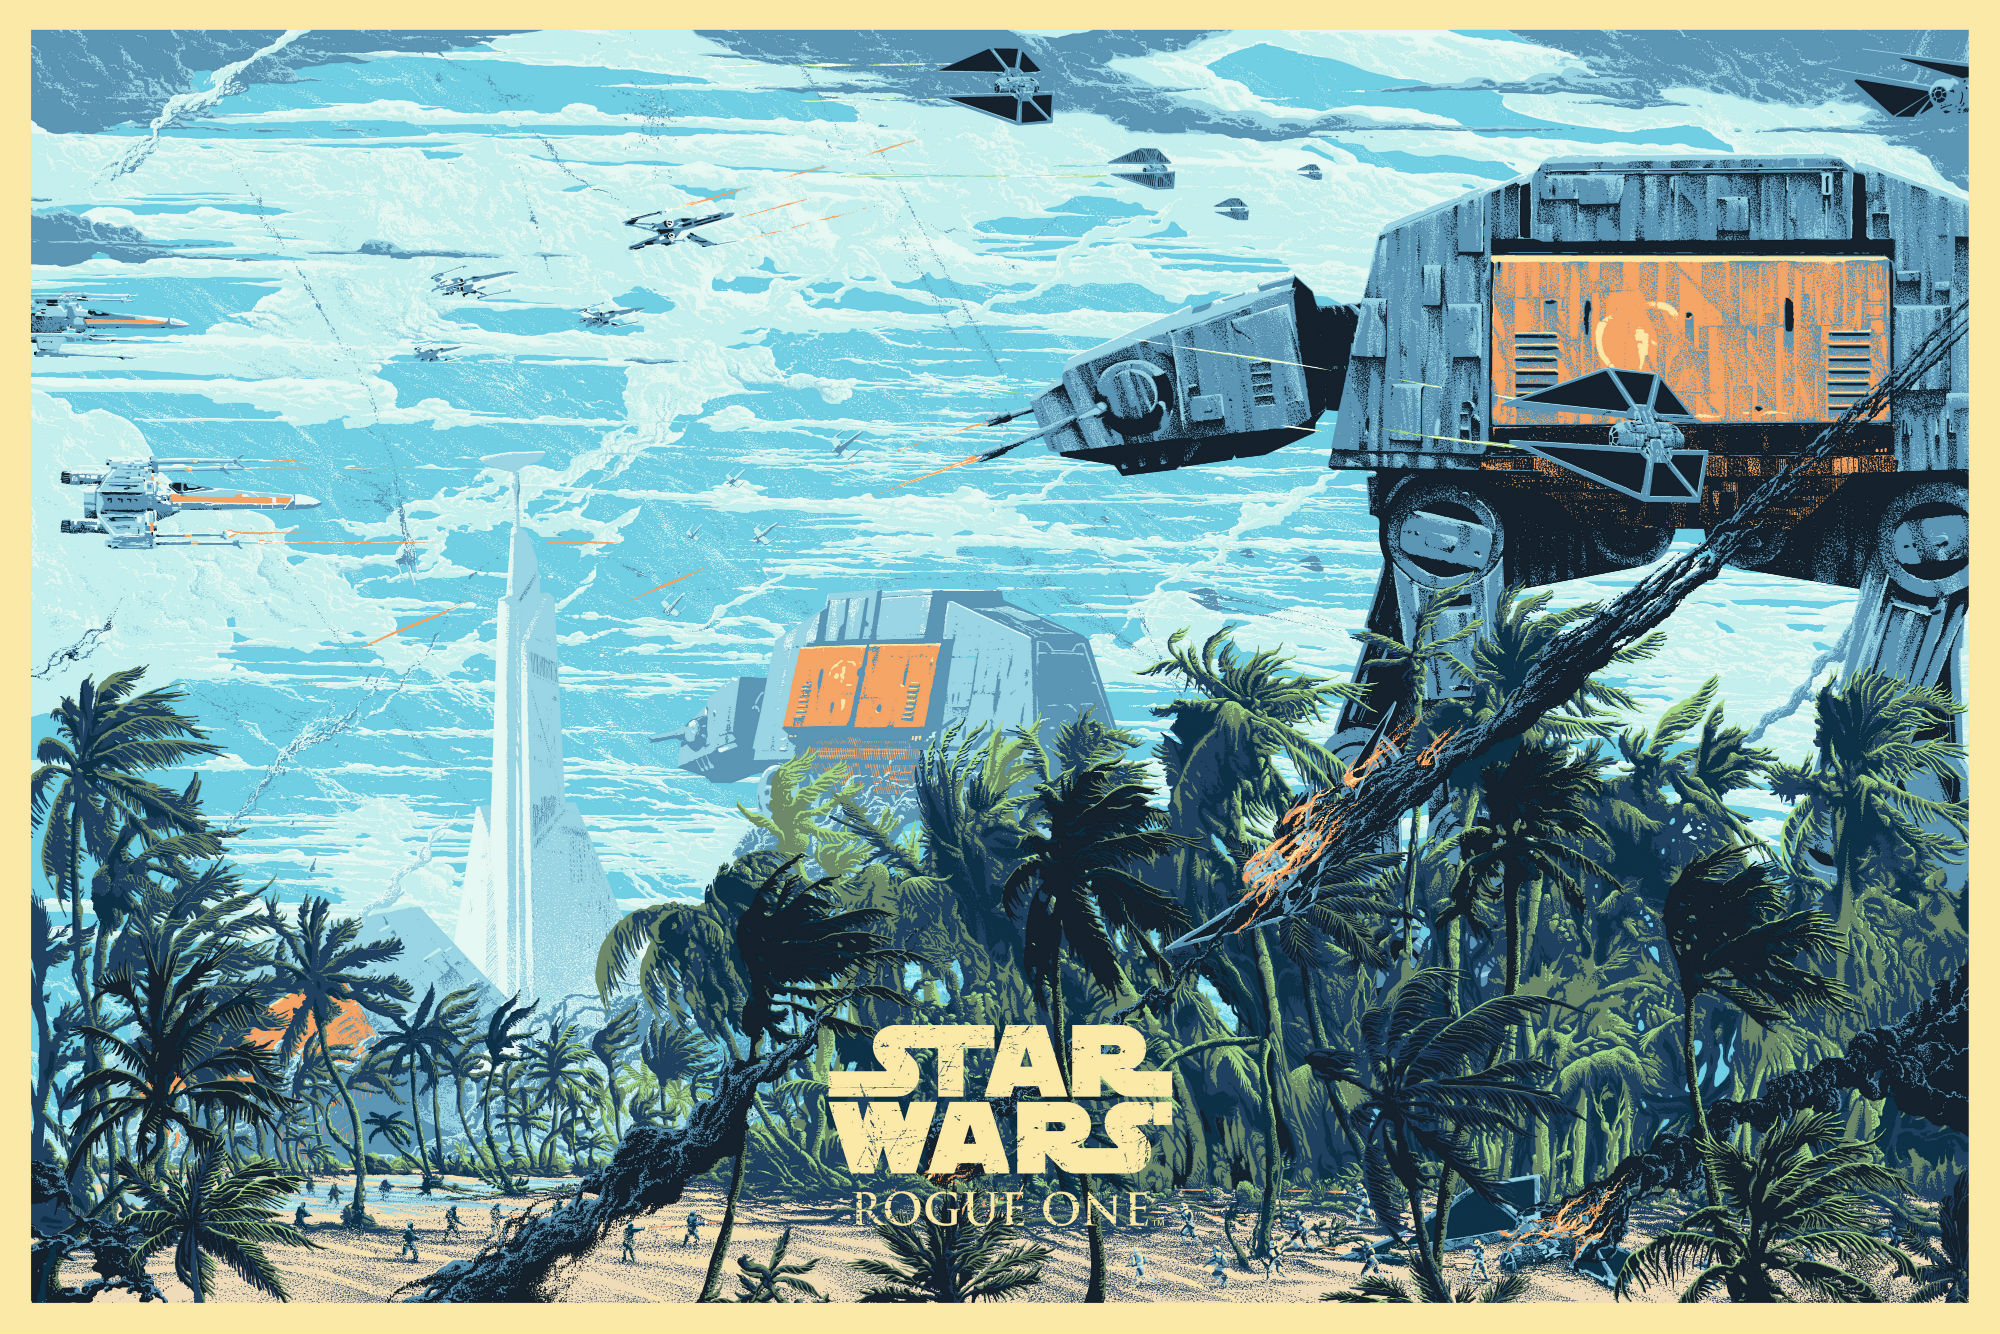 Remember Scarif’s Better Days With This Action-Packed Rogue One Poster